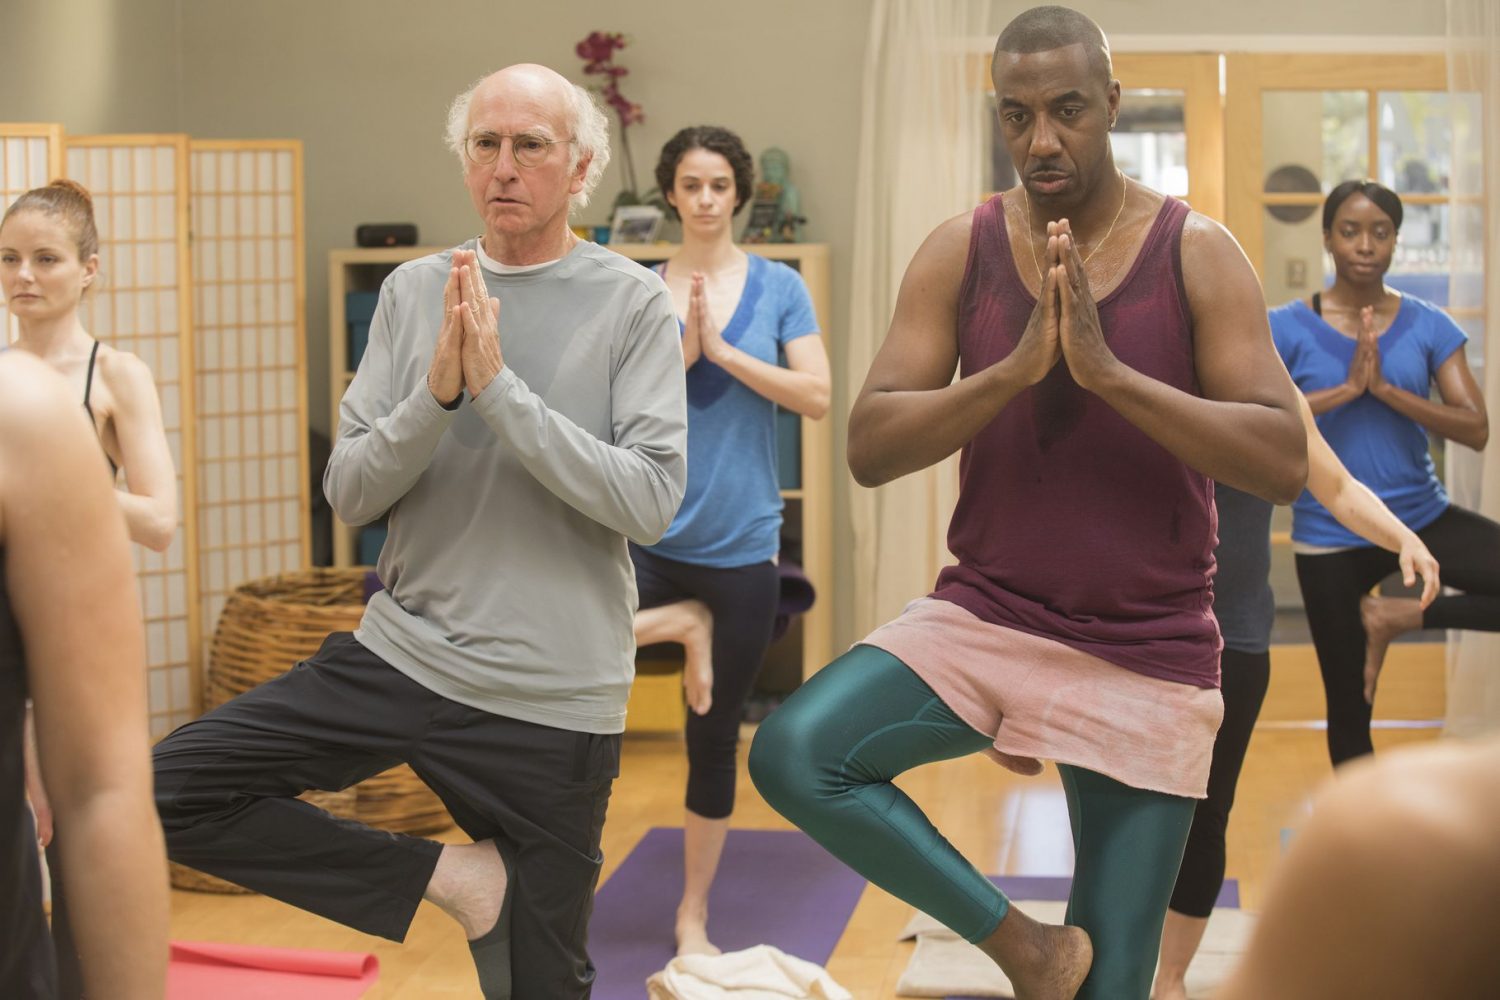 Yoga For Men? 5 Reasons Why You Should Go With The Flow